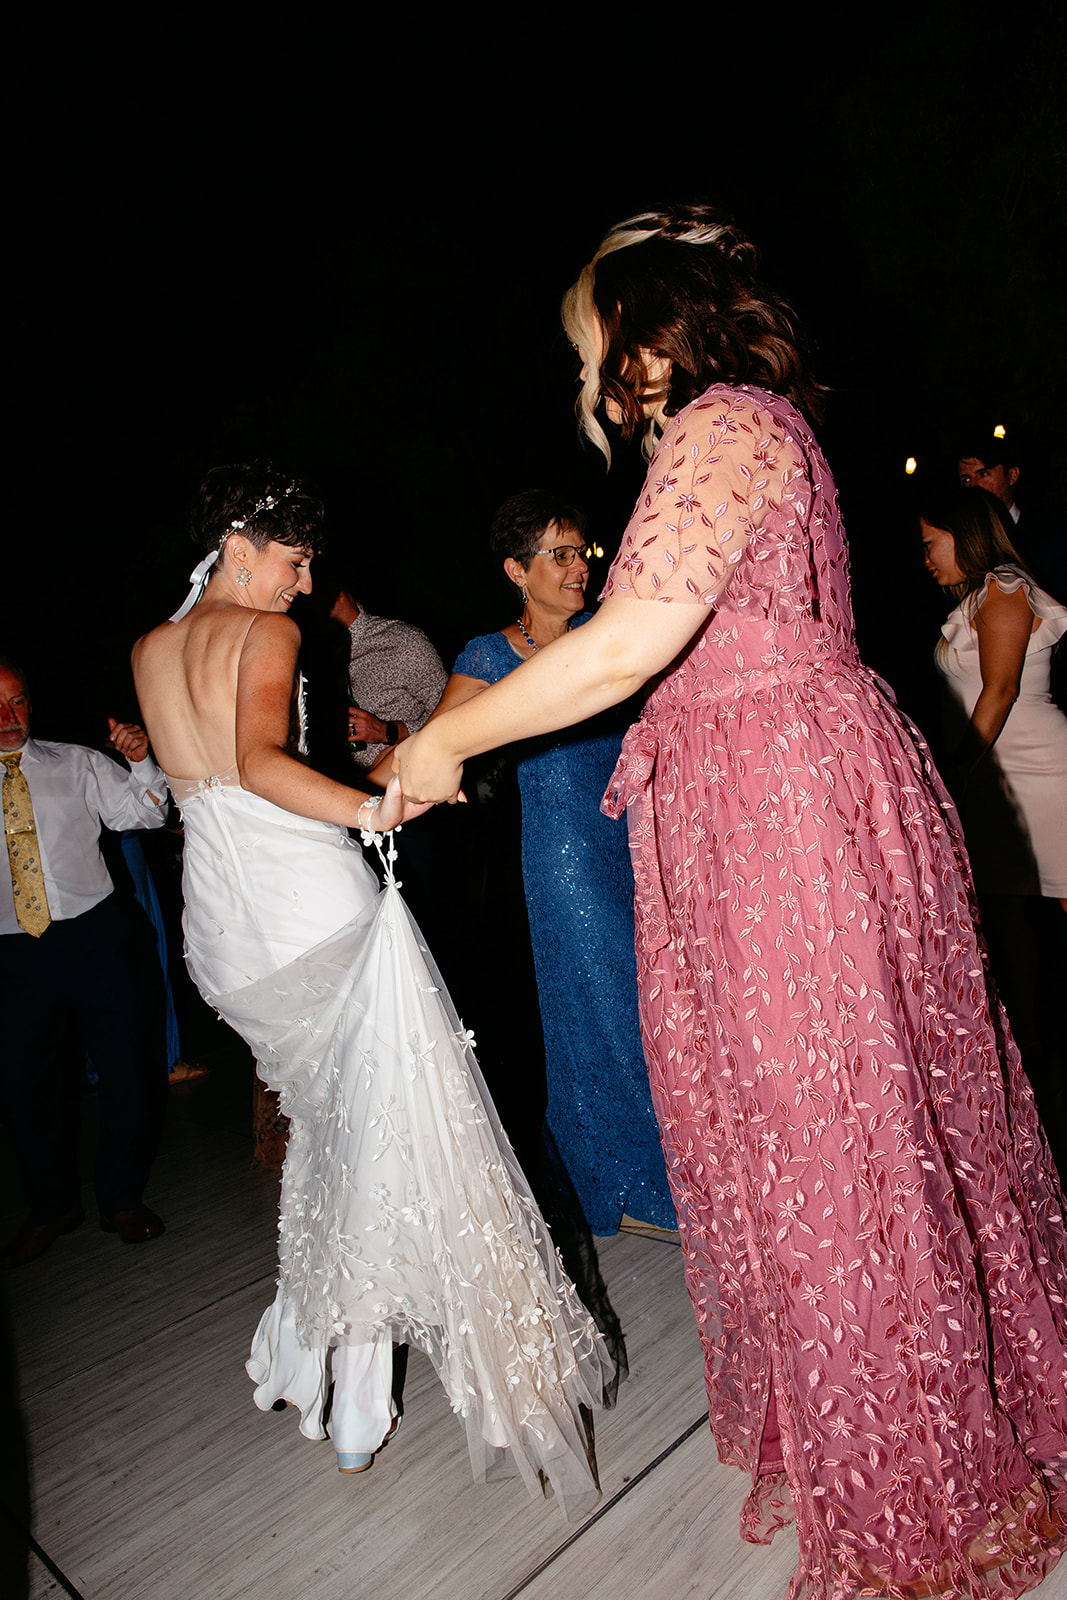 Two women in dresses dance joyfully at a nighttime outdoor wedding reception, surrounded by other guests.